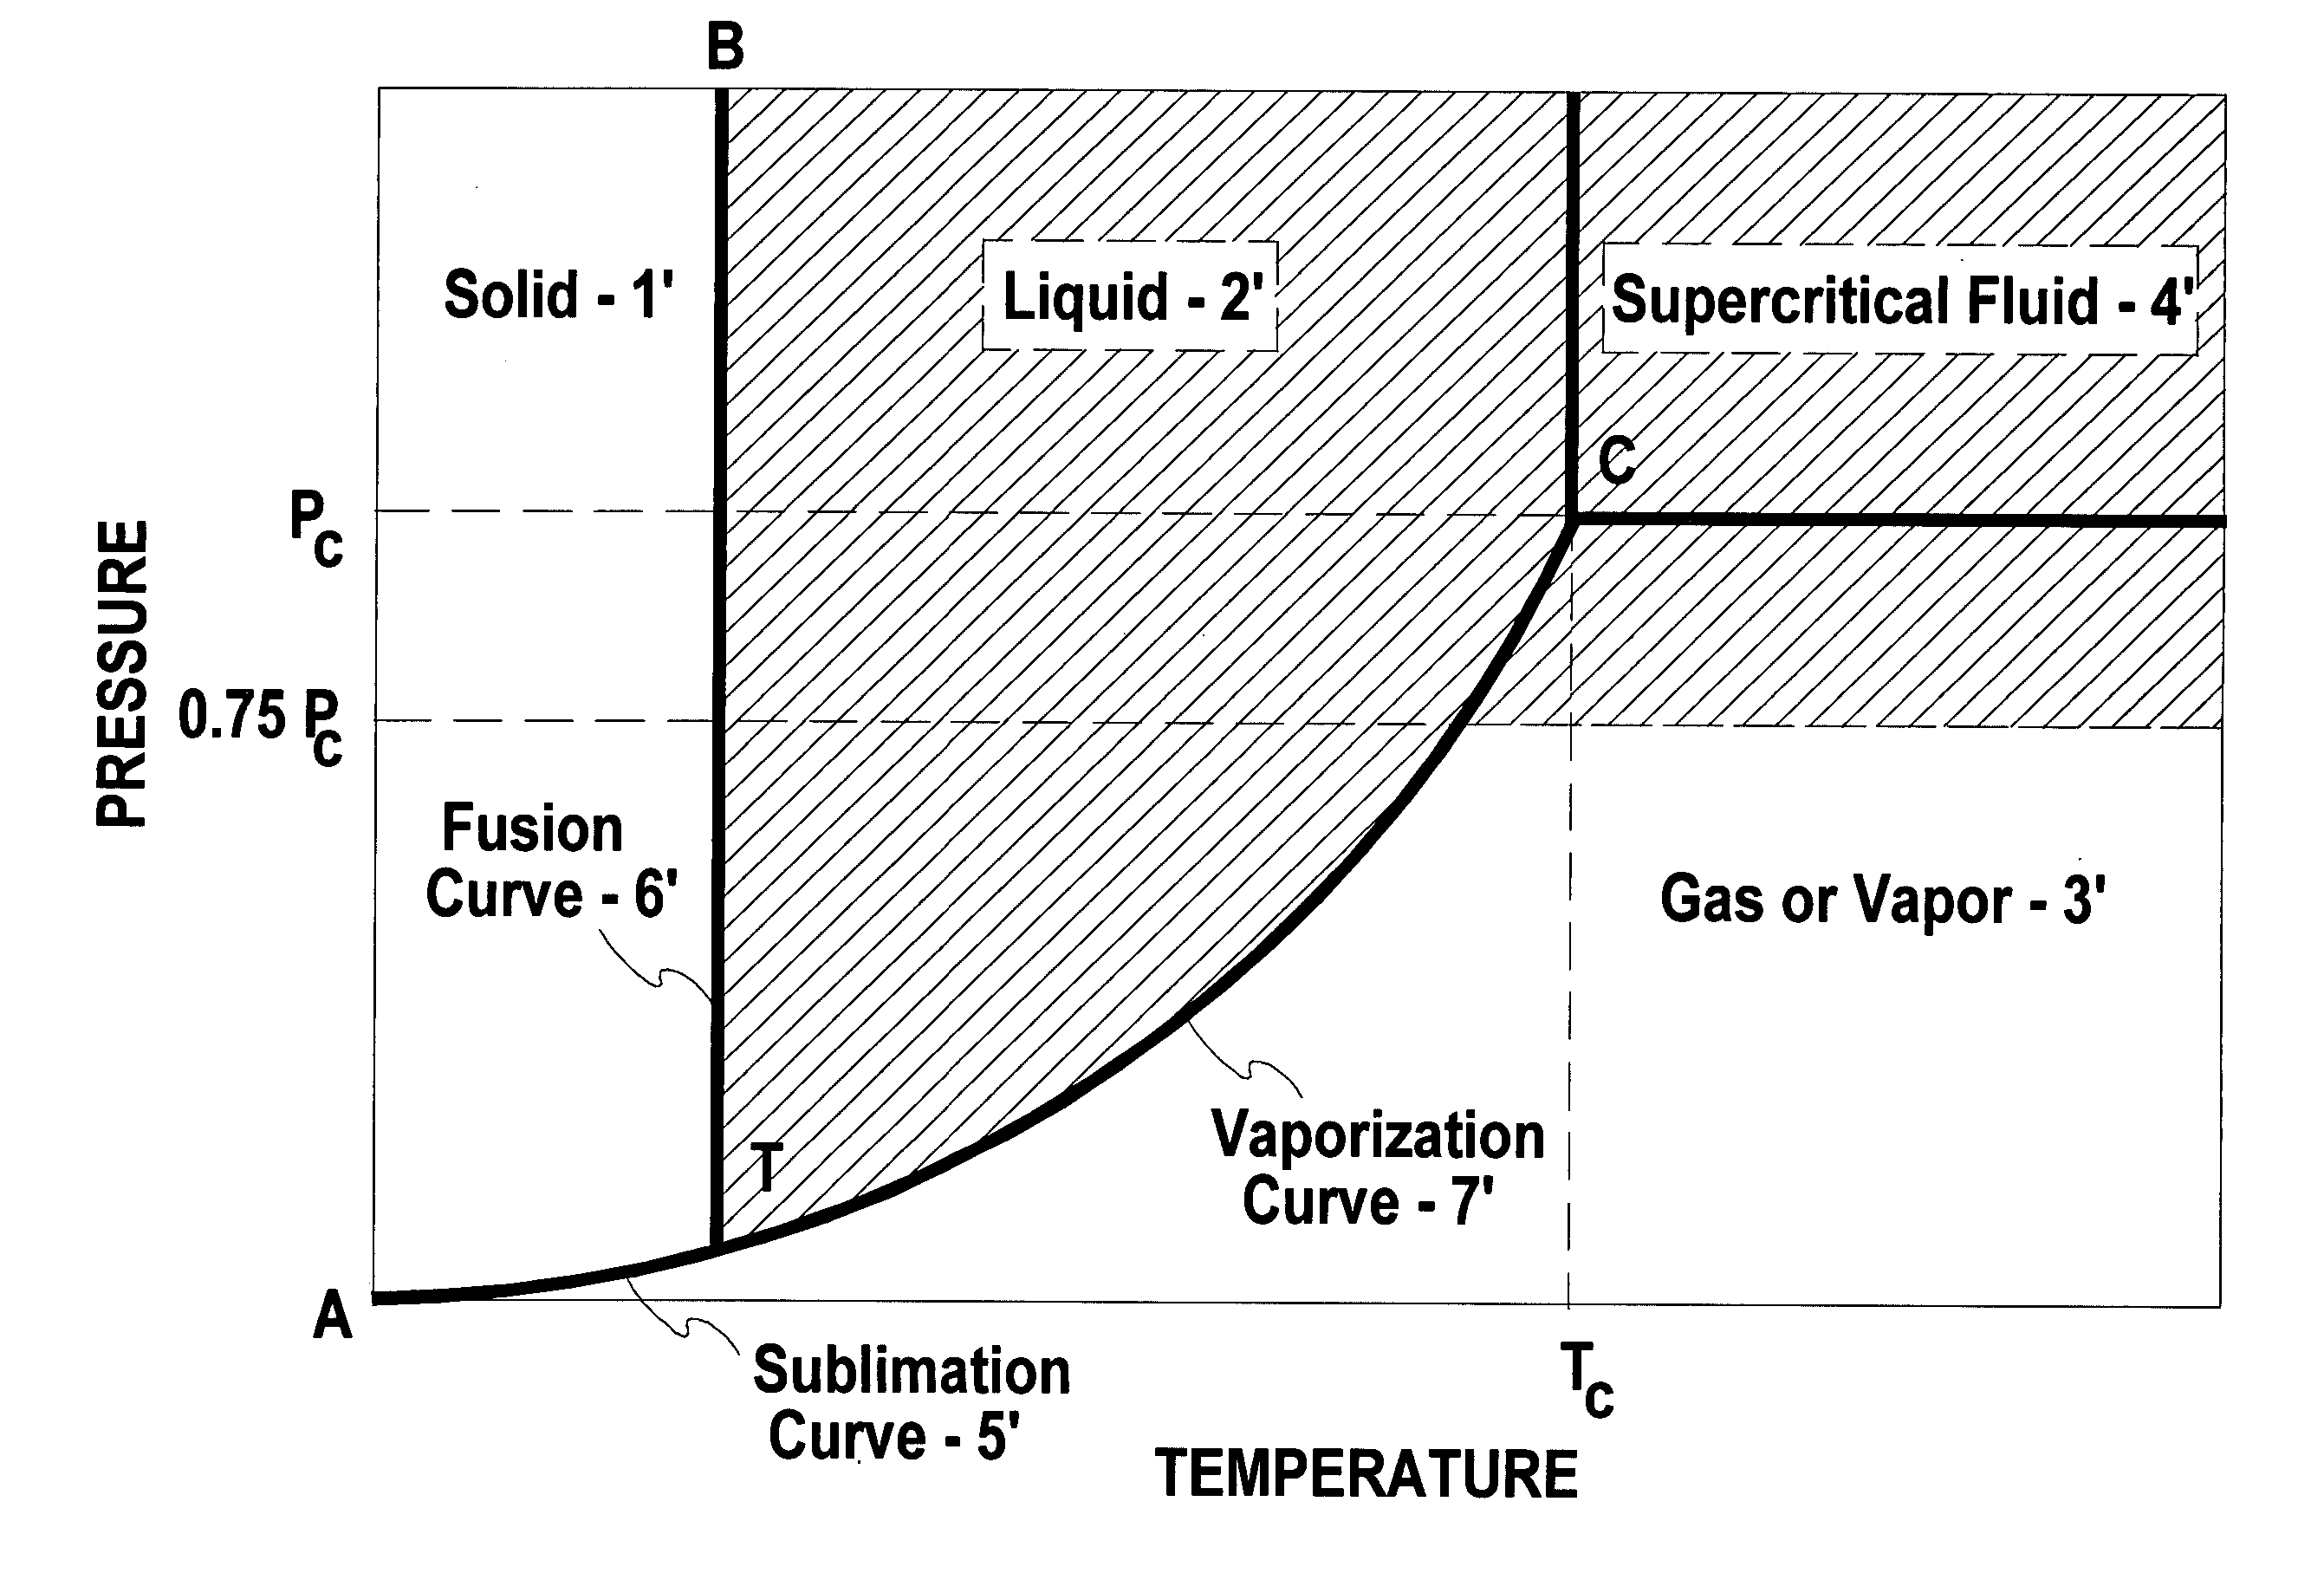 Processing of substrates with dense fluids comprising acetylenic diols and/or alcohols